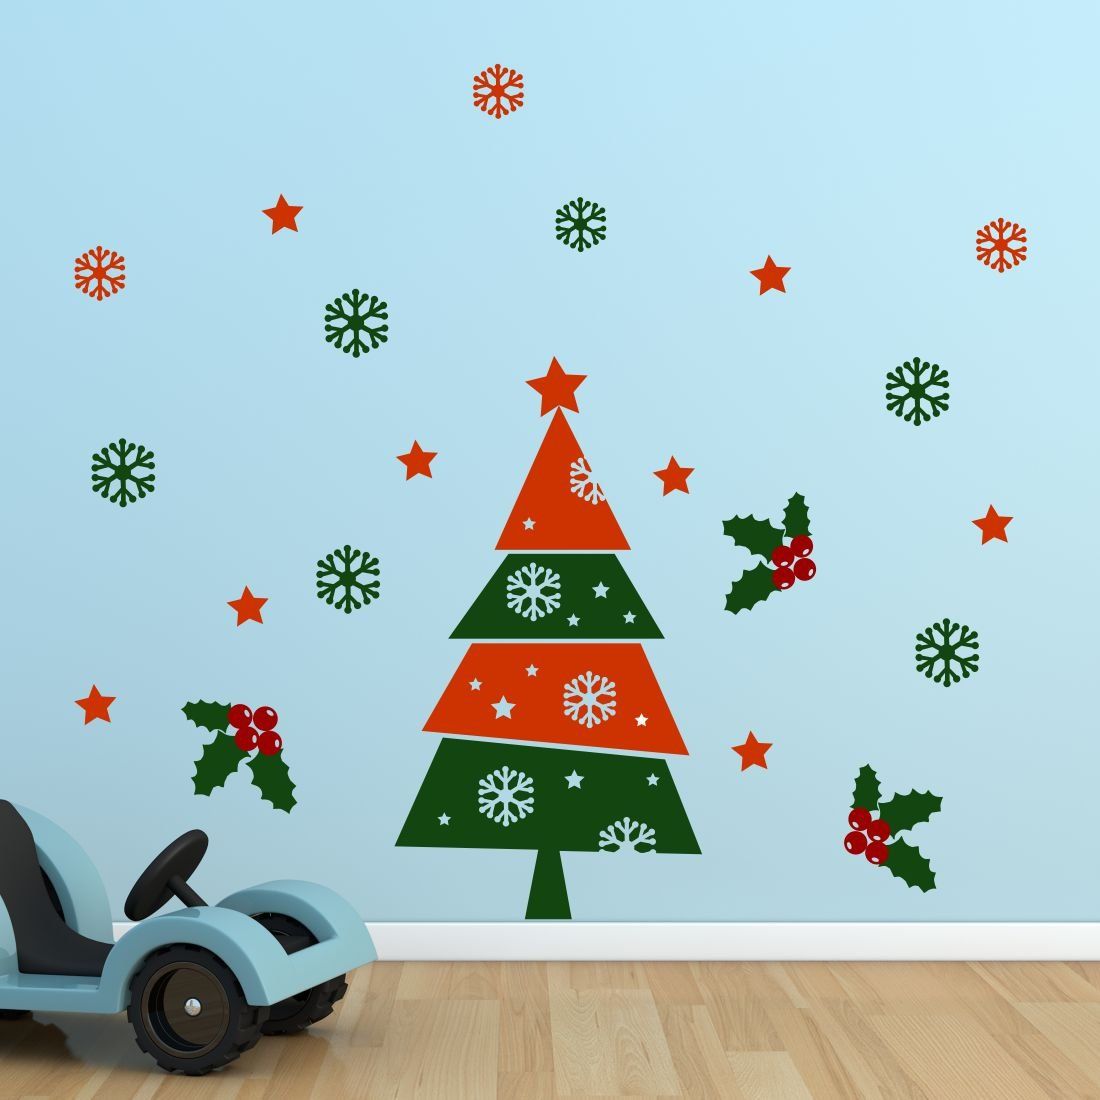 Beautiful Christmas Tree With Snowflakes And Stars - Wall Stickers ...